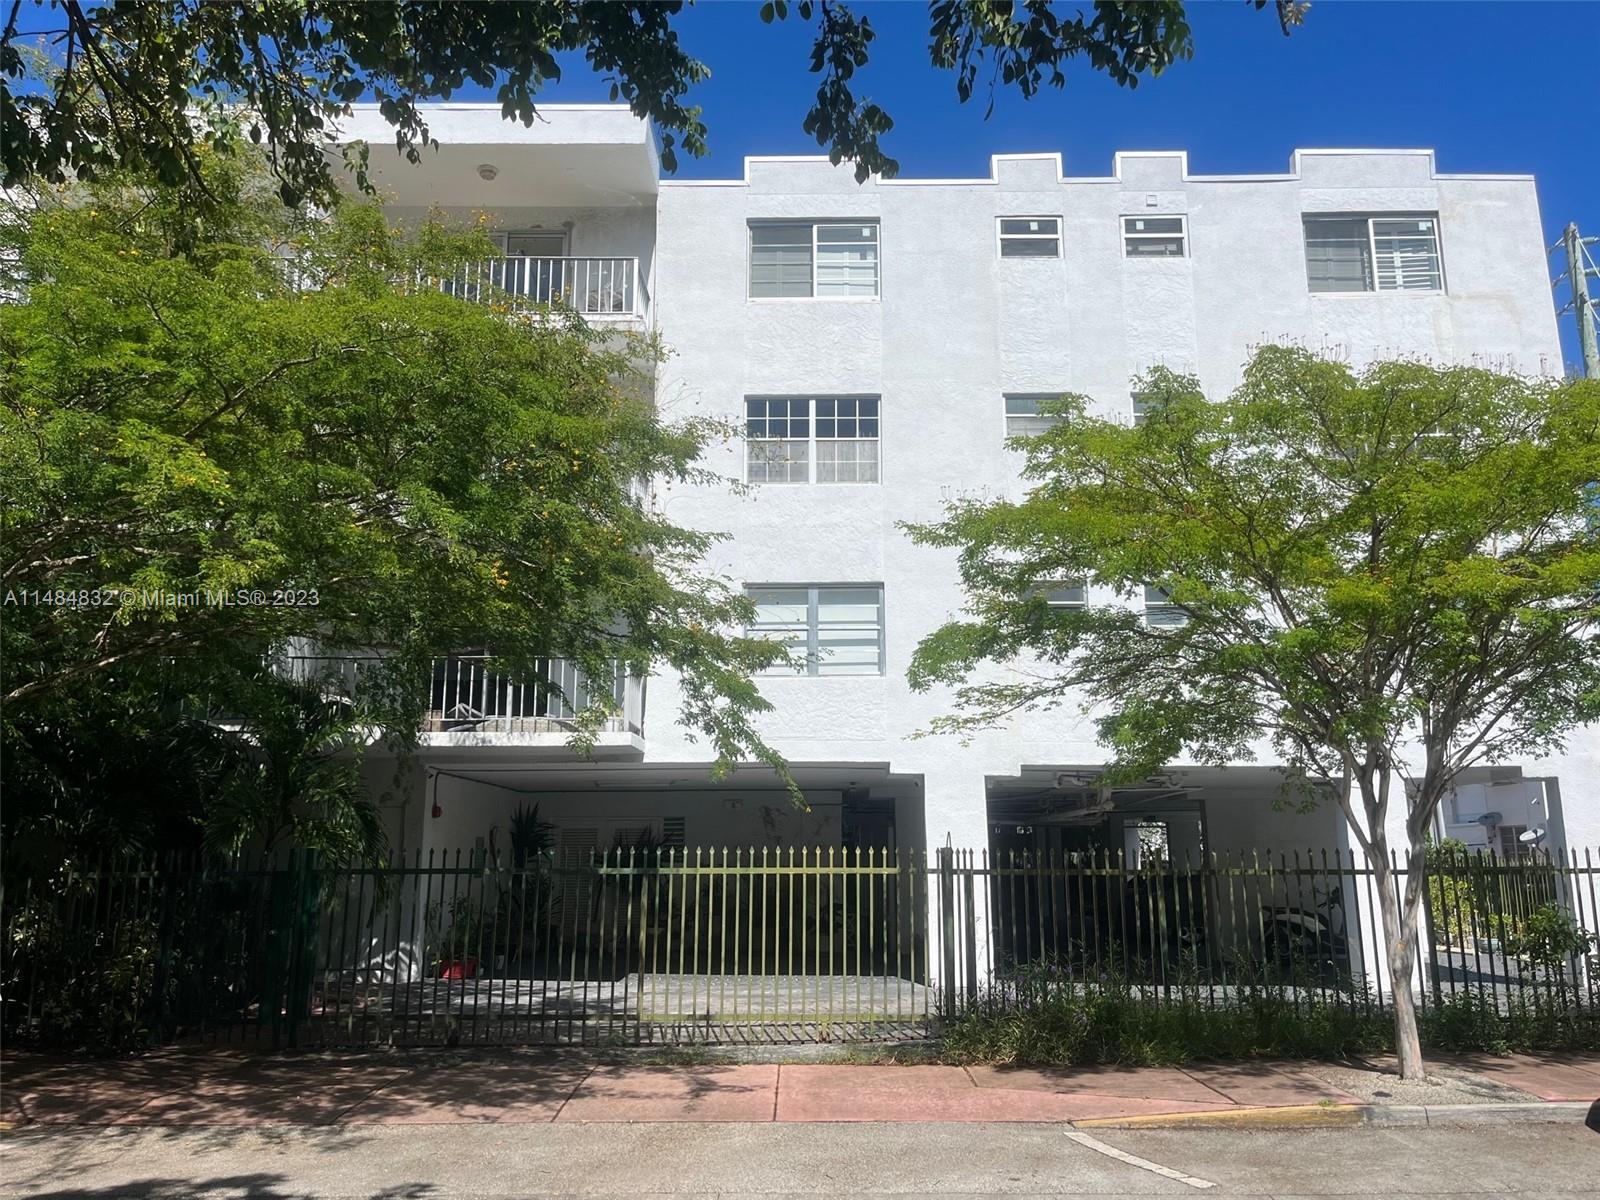 Great opportunity to own in Miami Beach, 3/2 condo in quiet building. Accordion shutters, tile throughout, gated complex with covered assigned parking. Building is surrounded by multi-million dollar condos, and is walking distance to the beach, shopping, restaurants and the South Beach entertainment.